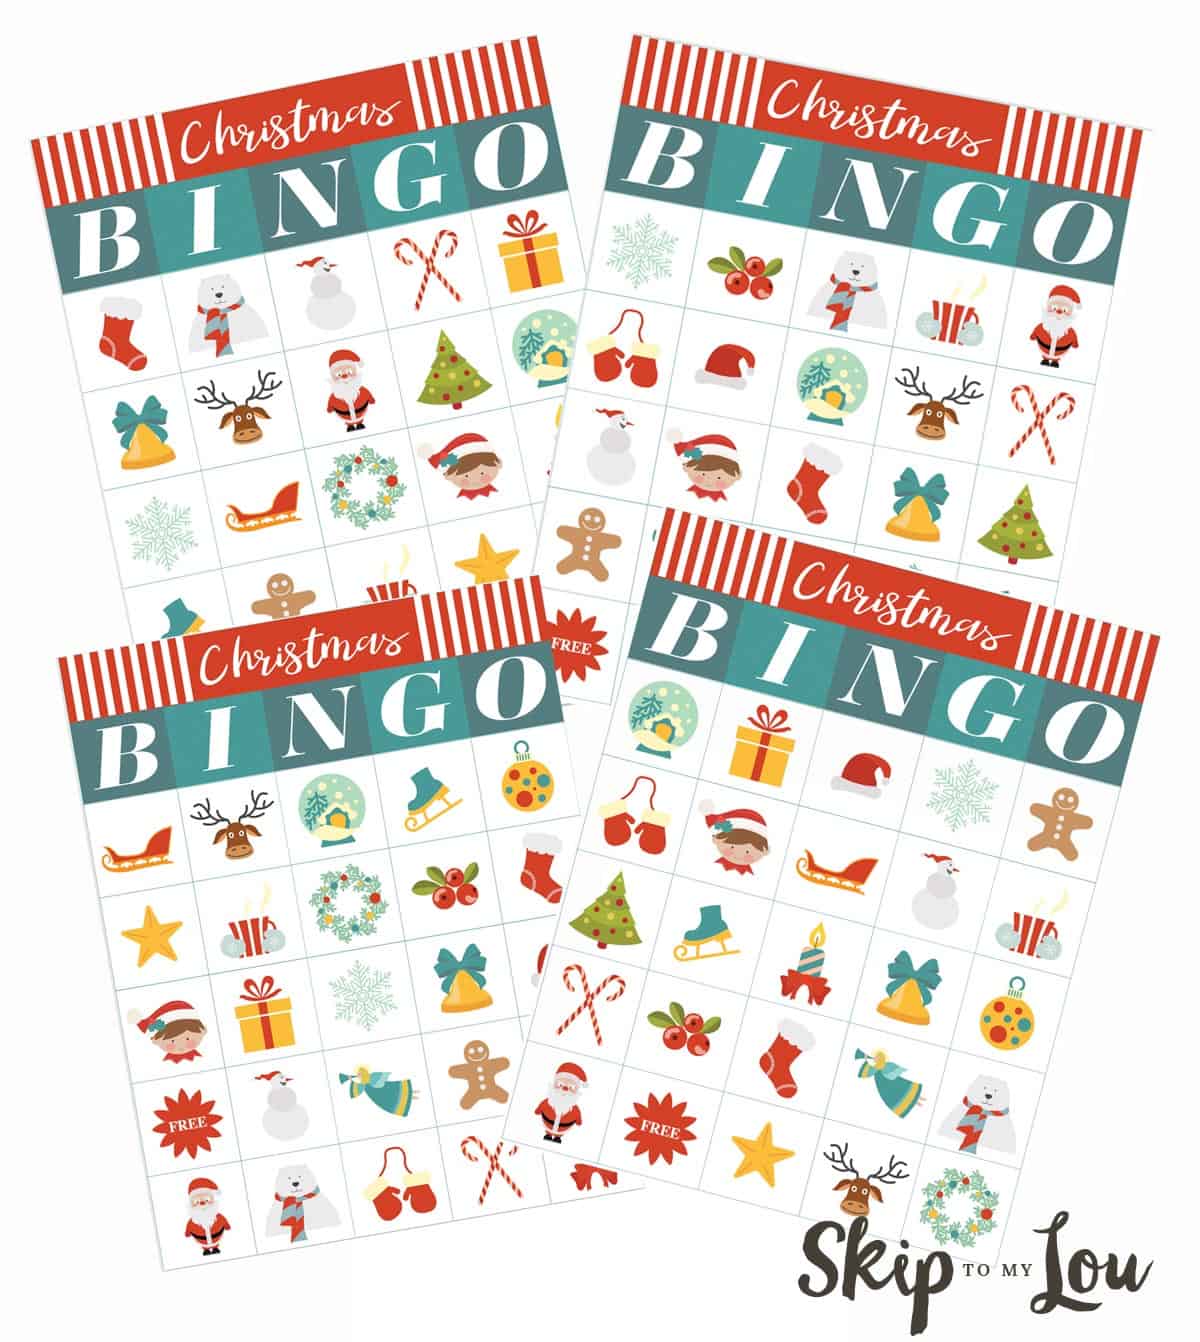 4 Red and green Christmas Bingo cards with Christmas pictures in the squares instead of numbers by Skip to my Lou.